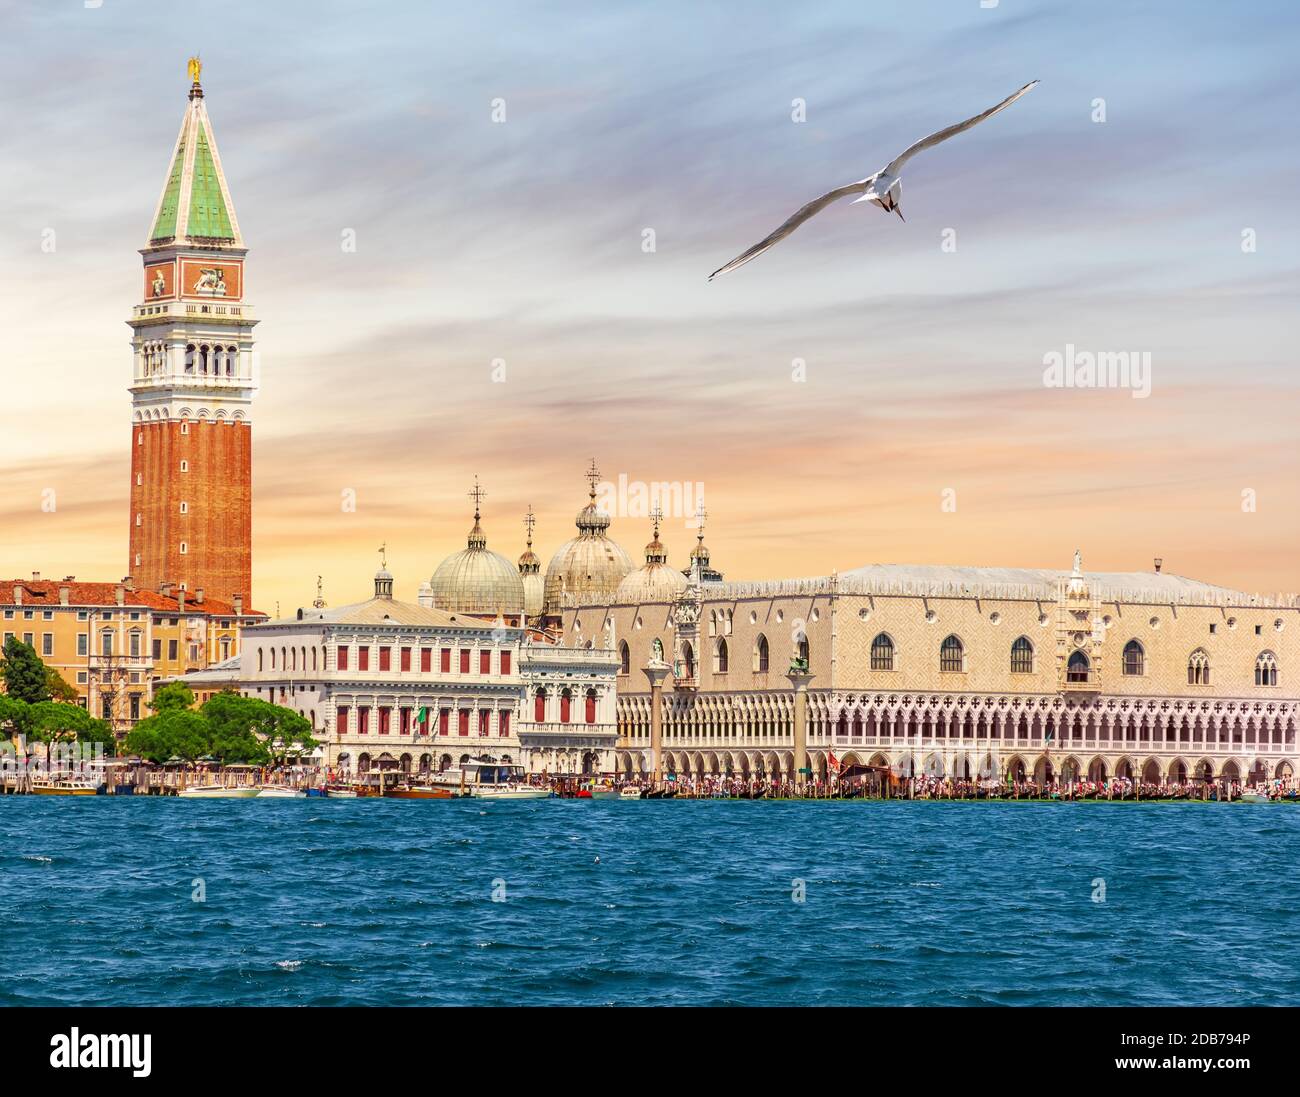 Venice famous places, view from the Canal, Italy. Stock Photo